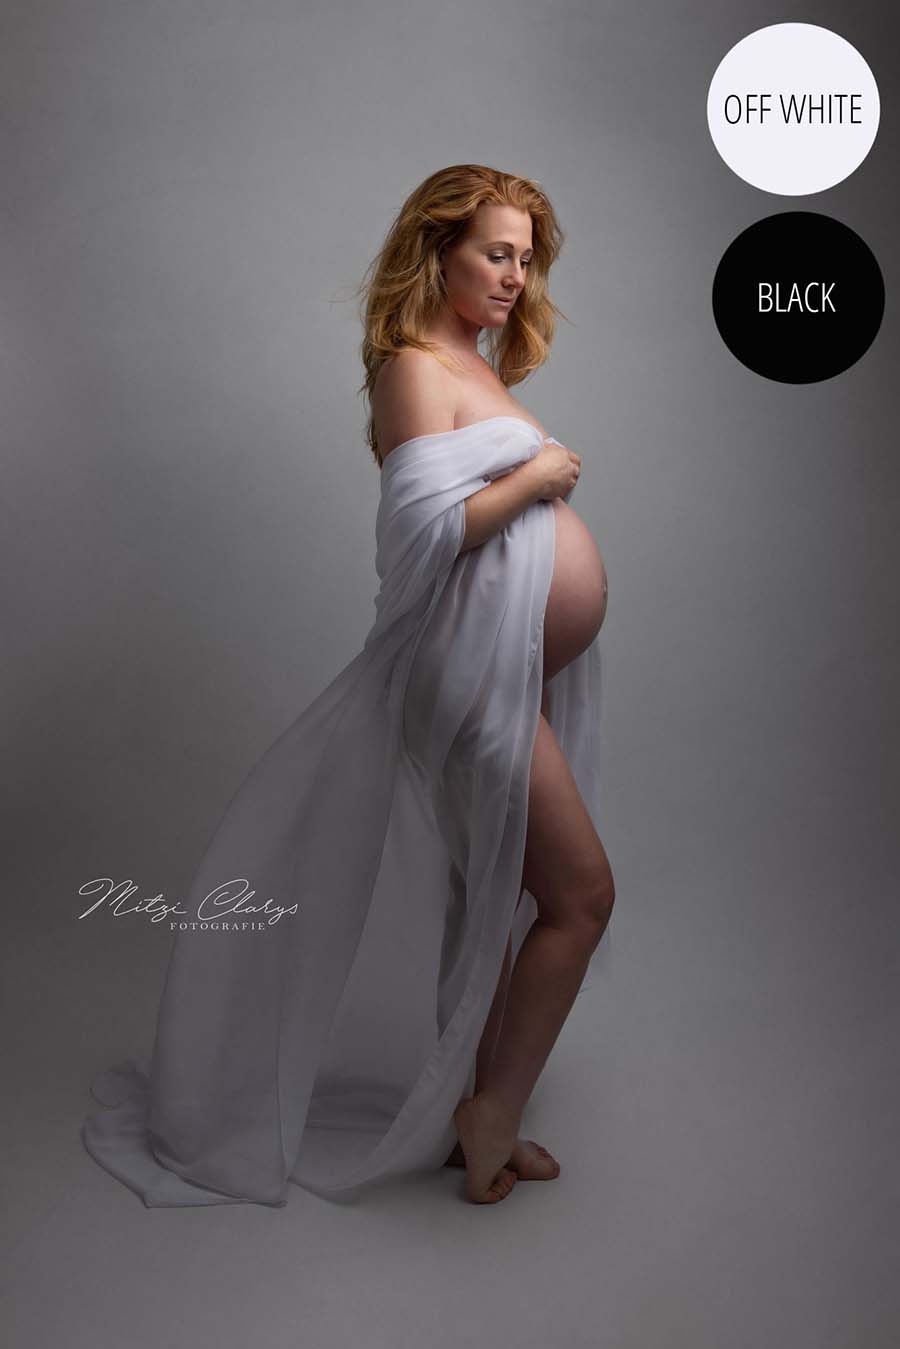 Blong pregnant model poses in a studio wearing a draping fabric made of chiffon in off white color around her arms. She looks to the side and her belly is uncovered. 